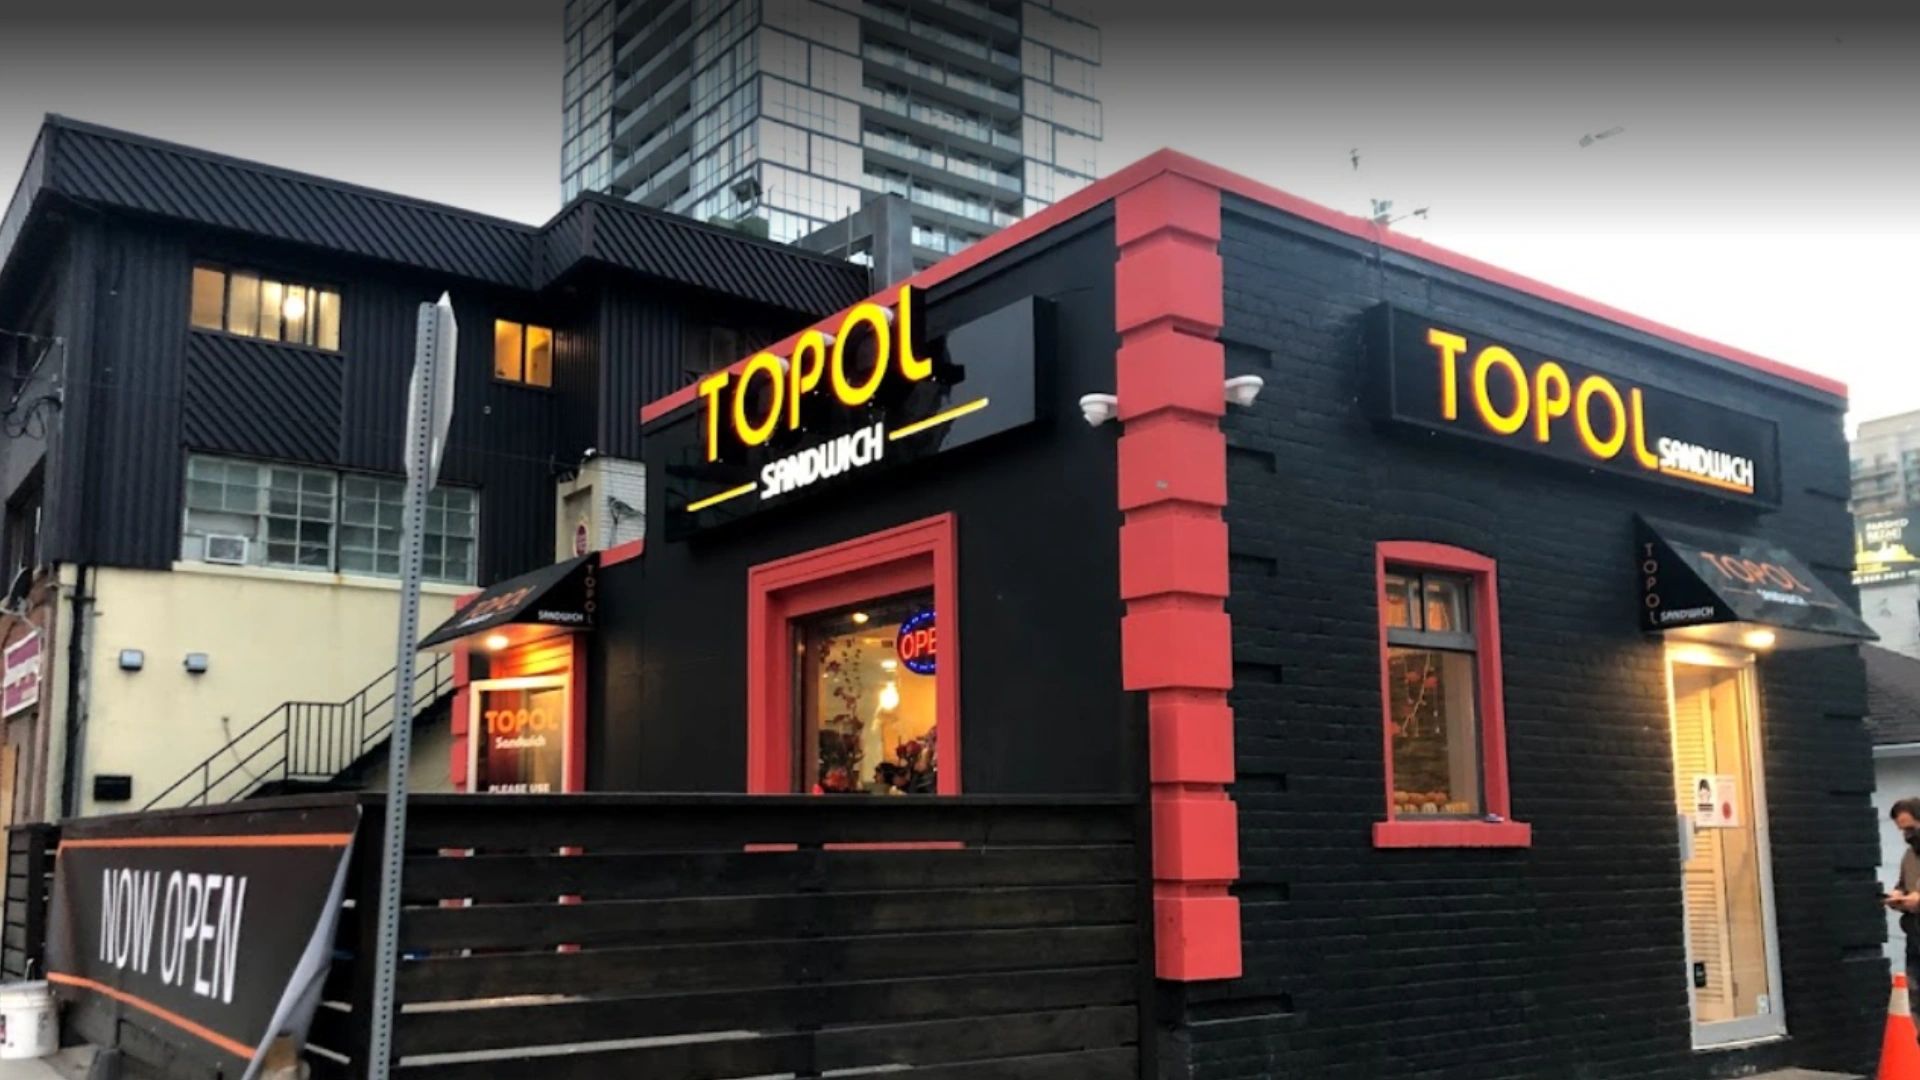 Topol Sandwich North York Branch located at Mel last man square in north of Sheppard and Yonge St